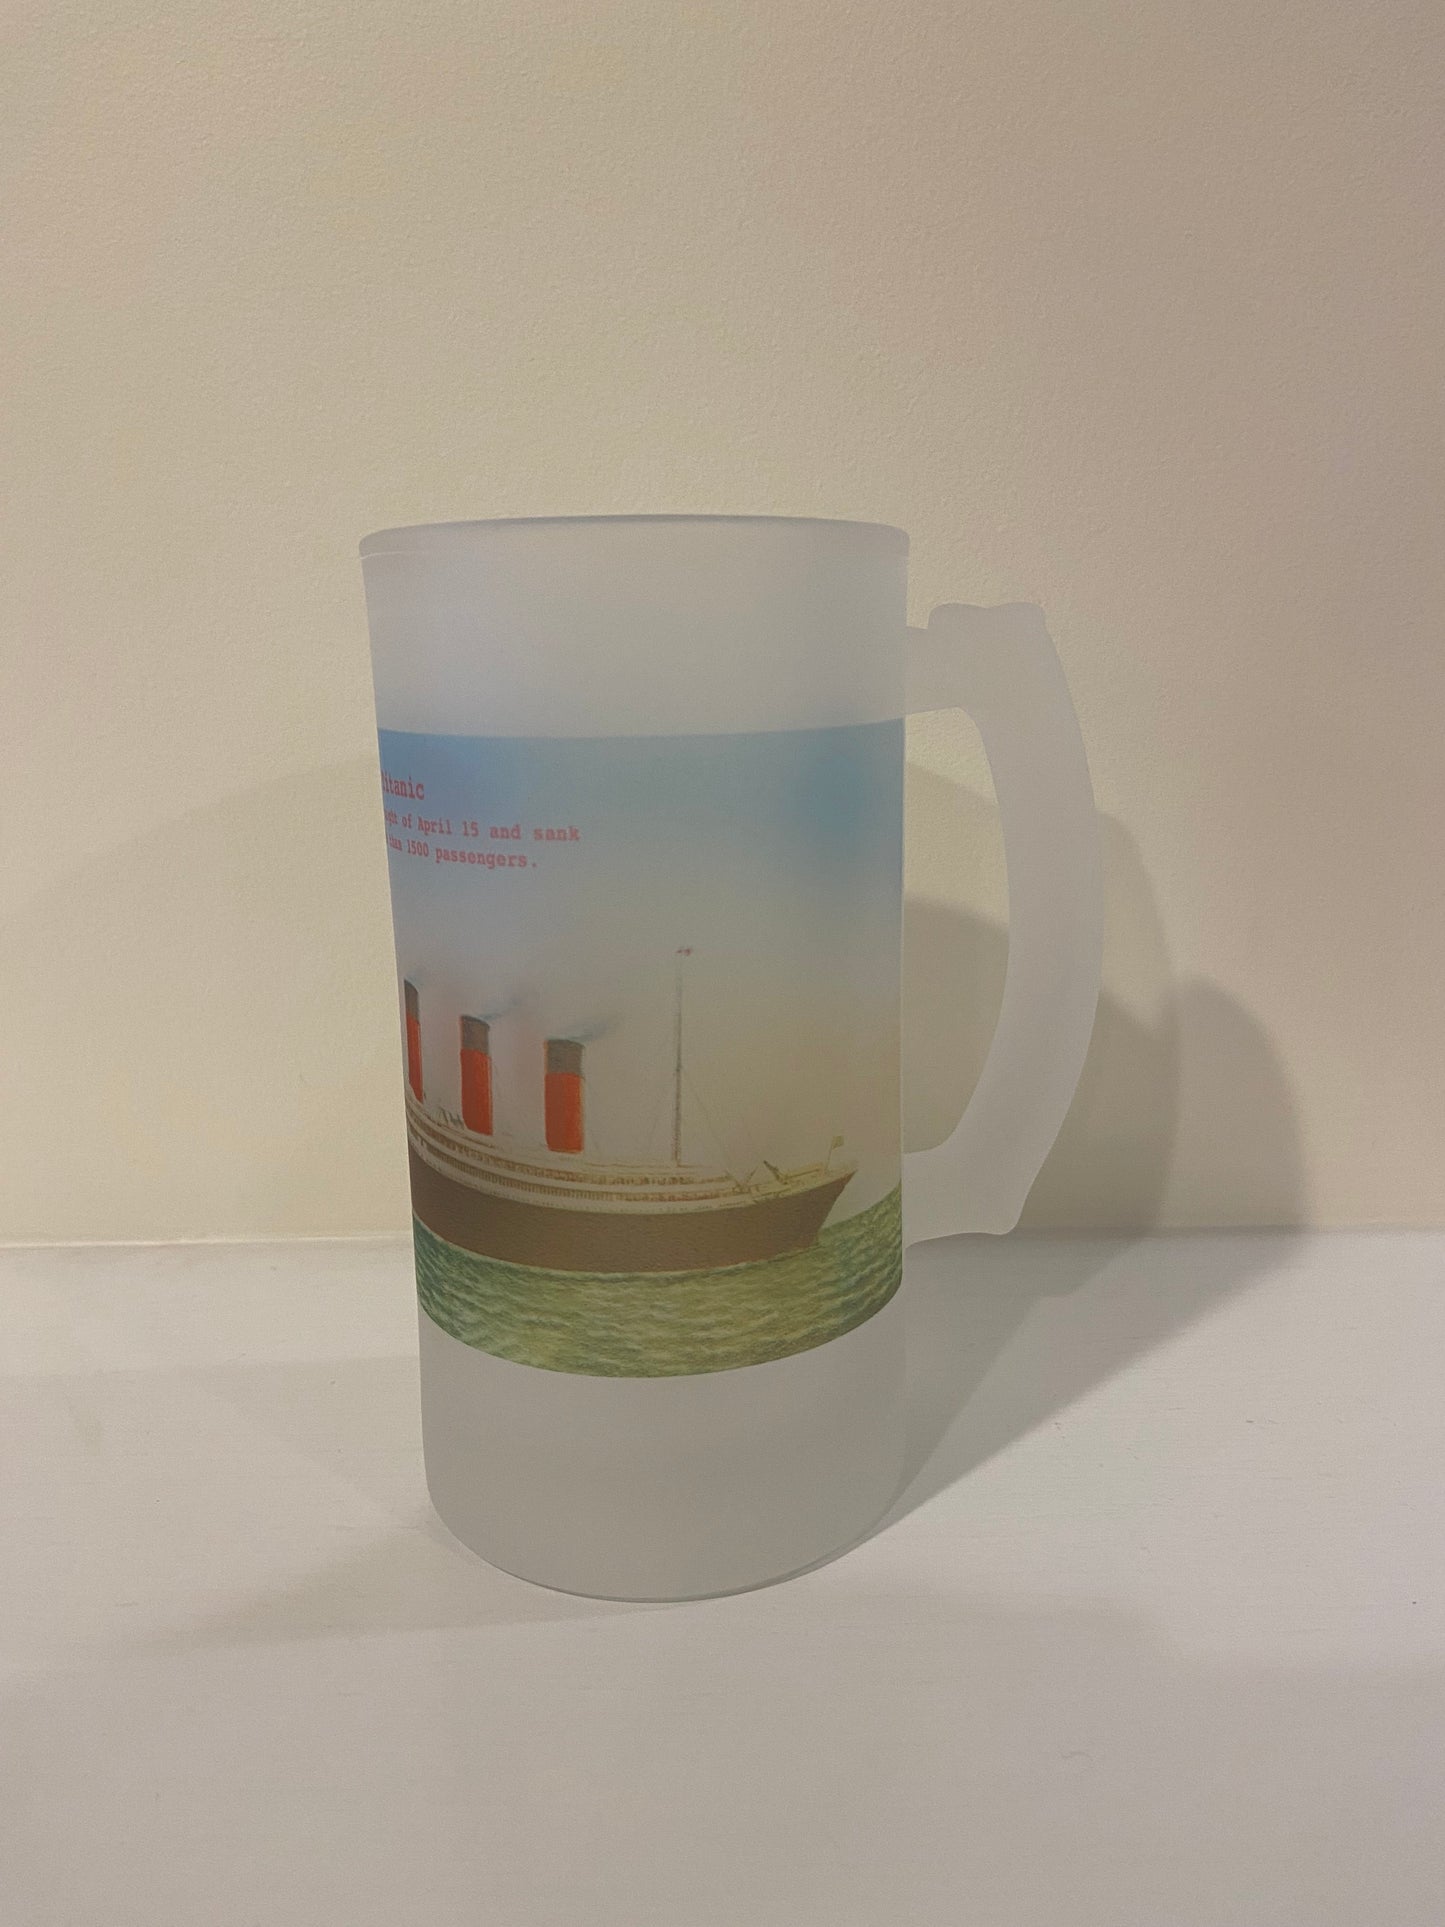 Colorful Frosted Glass Mug Of The RMS Titanic